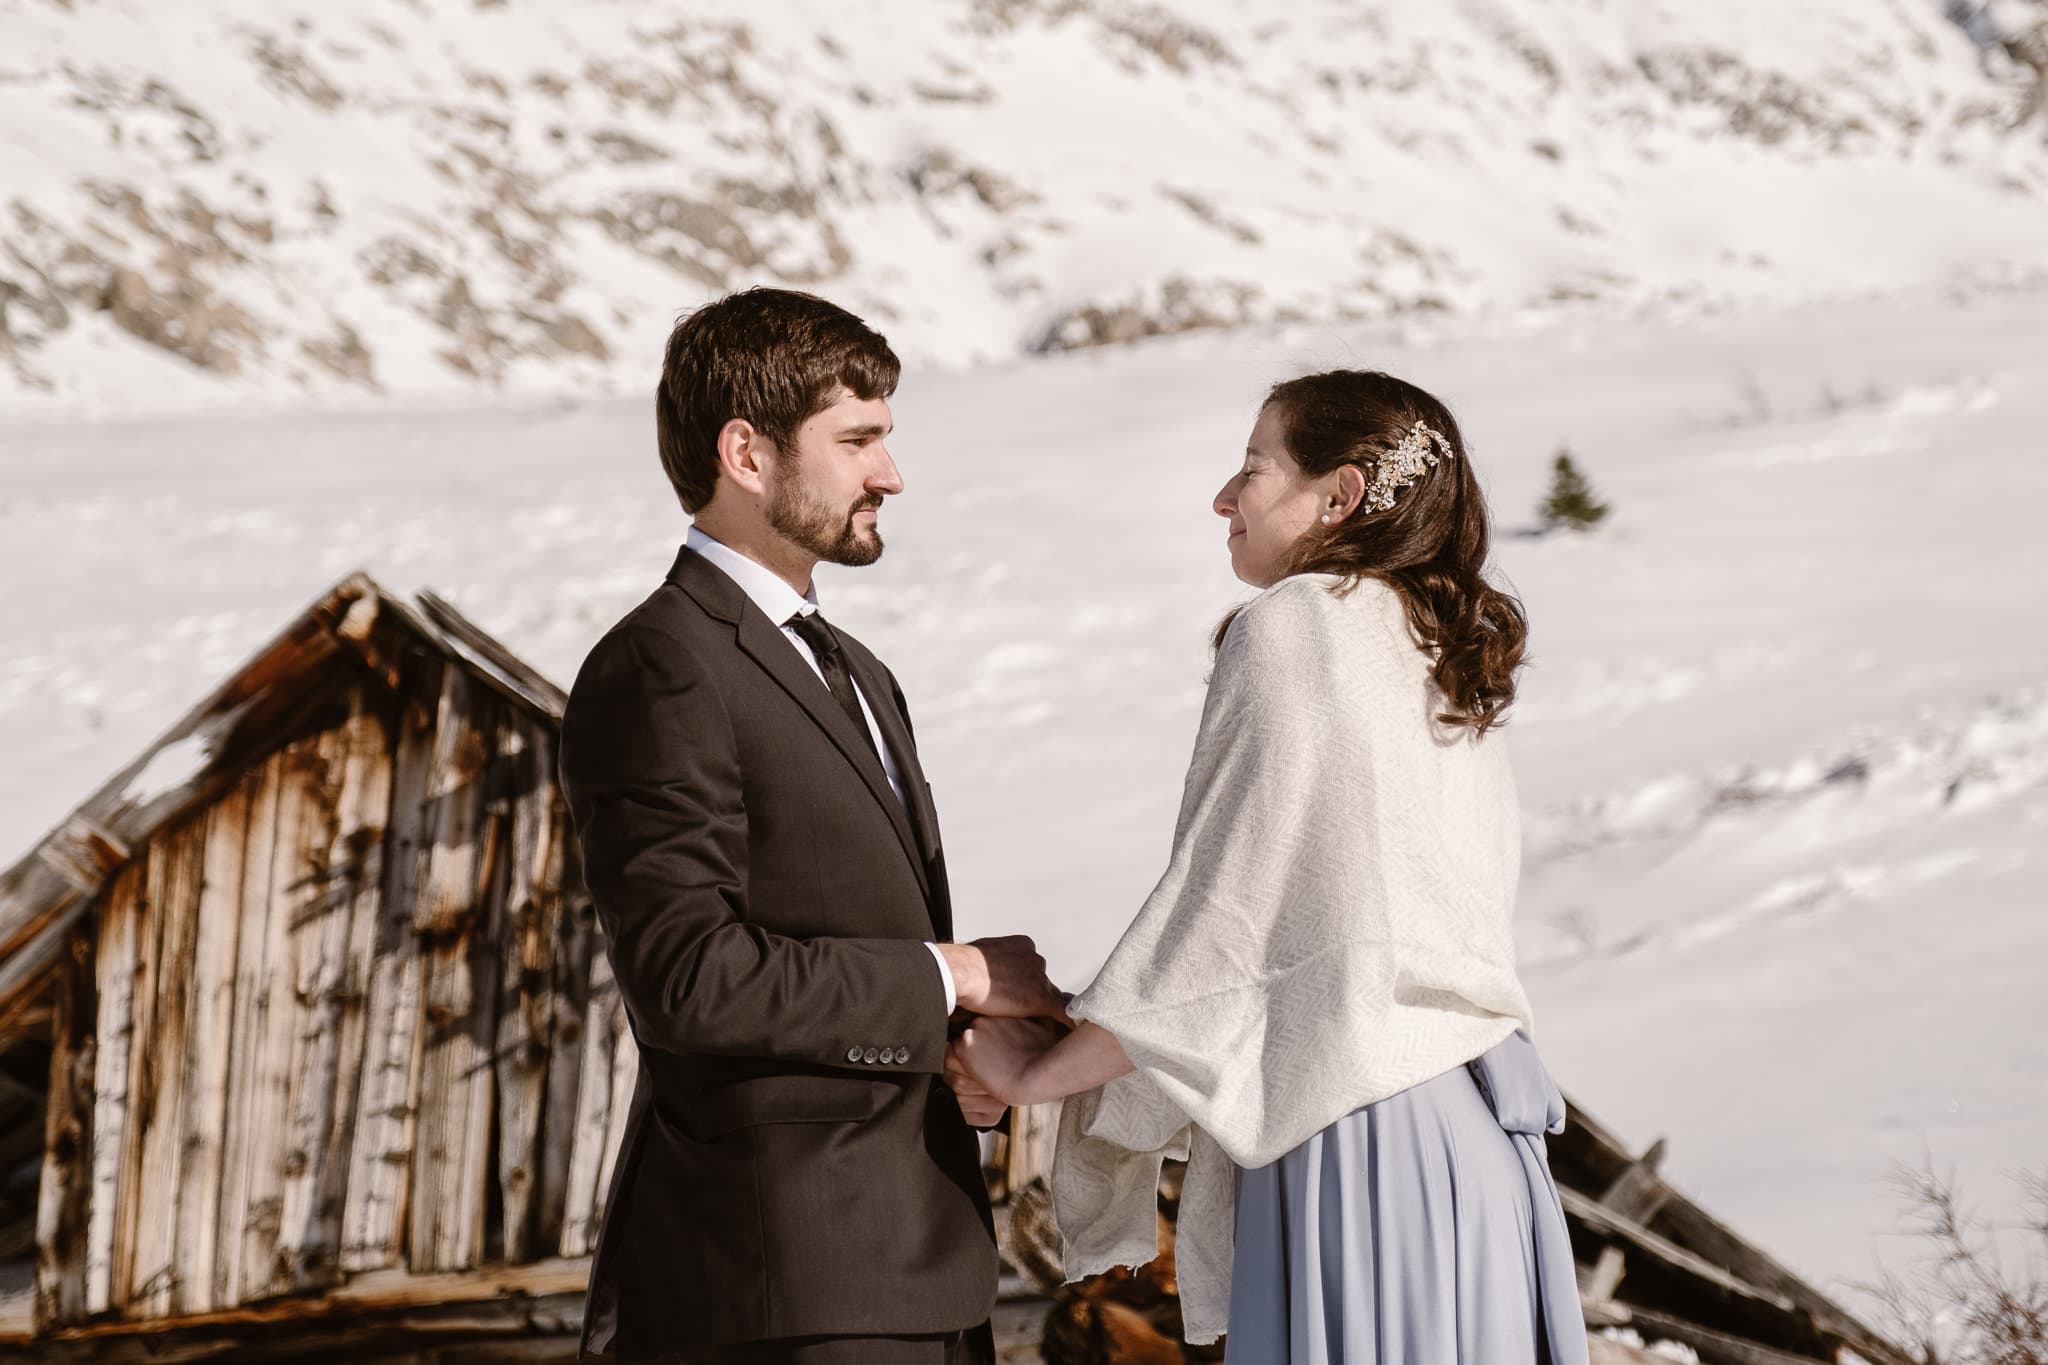 Bride and groom exchanging vows in snow covered mountains of Colorado, winter elopement photography